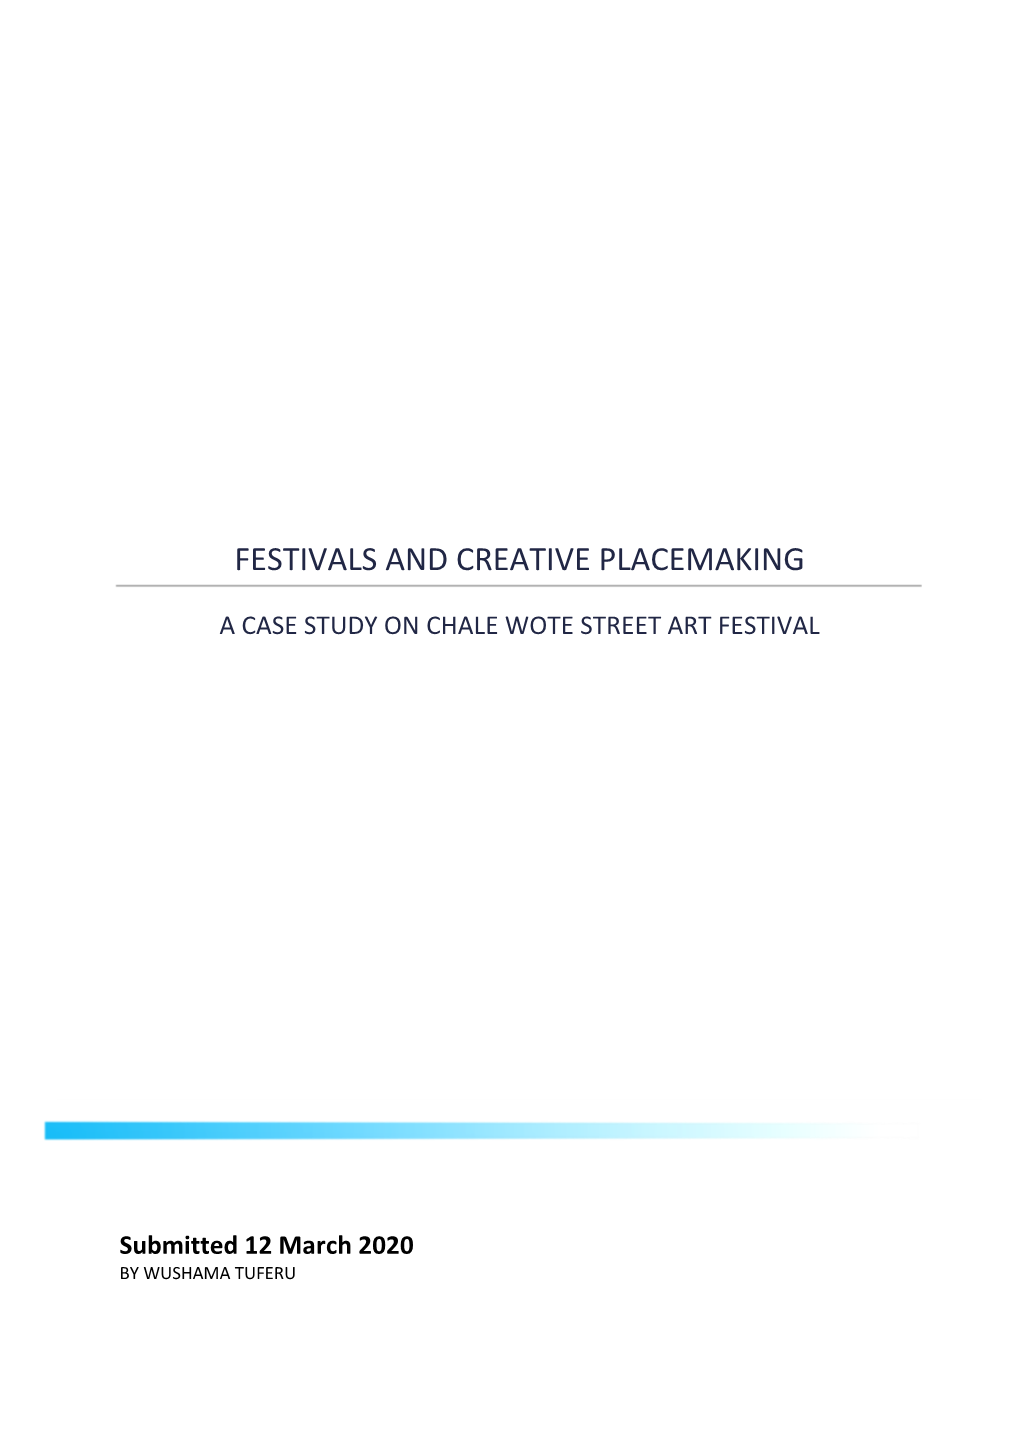 Festivals and Creative Placemaking